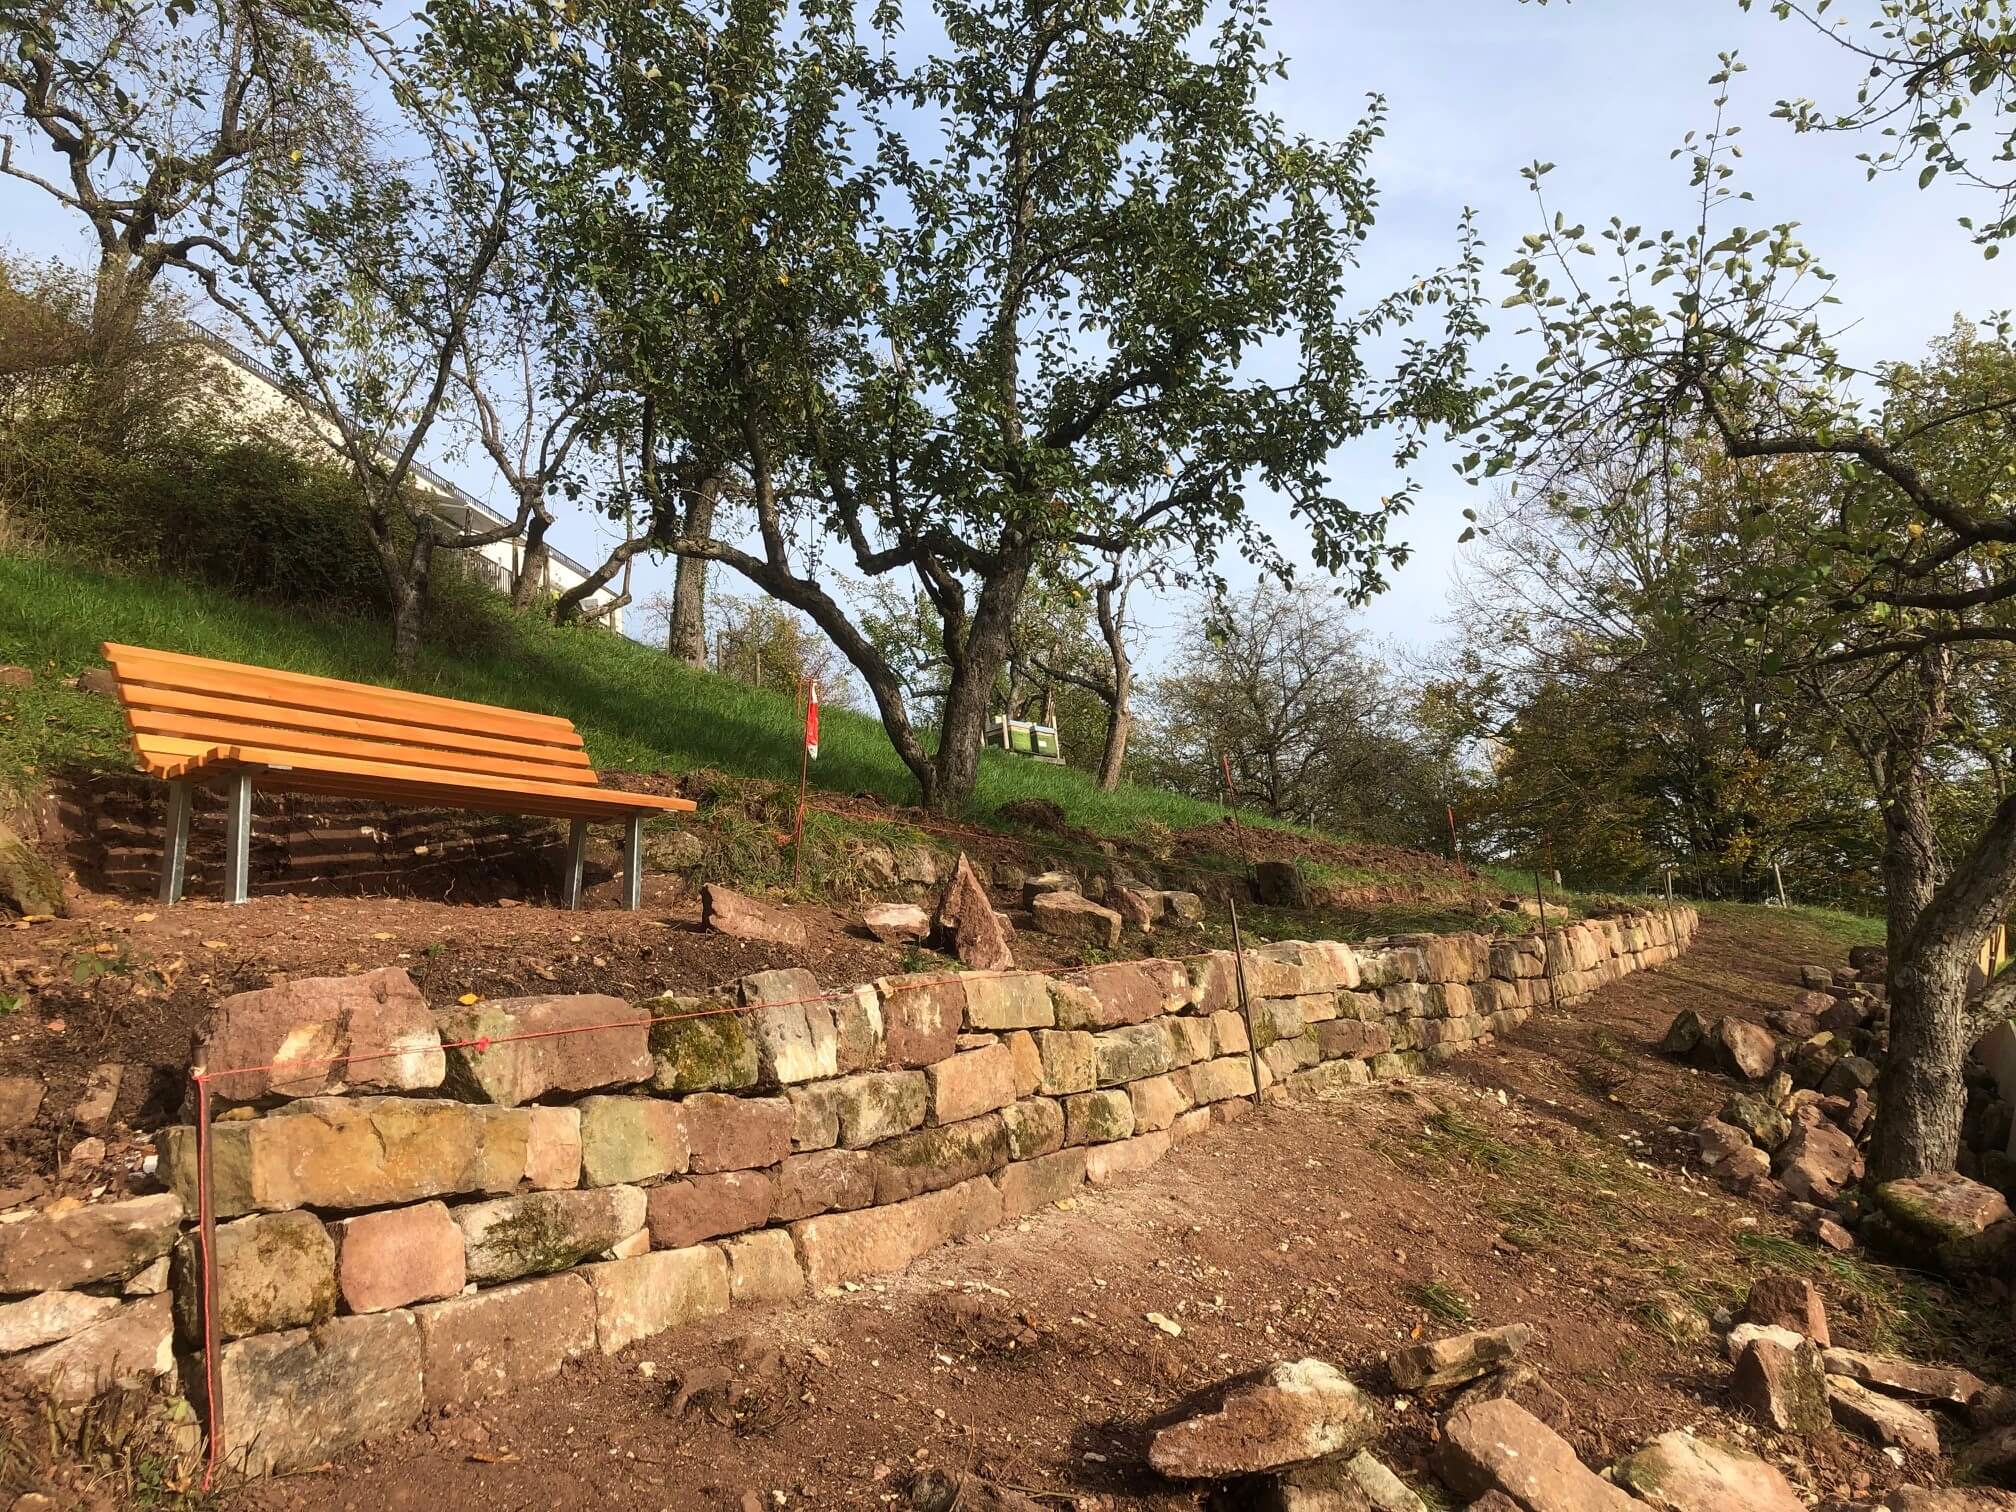 <p><strong>CONSTRUCTION OF A "PATH OF REFLECTION" WALL</strong><br />
Central Europe - SOMFY Germany – On November 1, just like every year, the SOMFY Germany team gathered around this traditional social project.</p>
